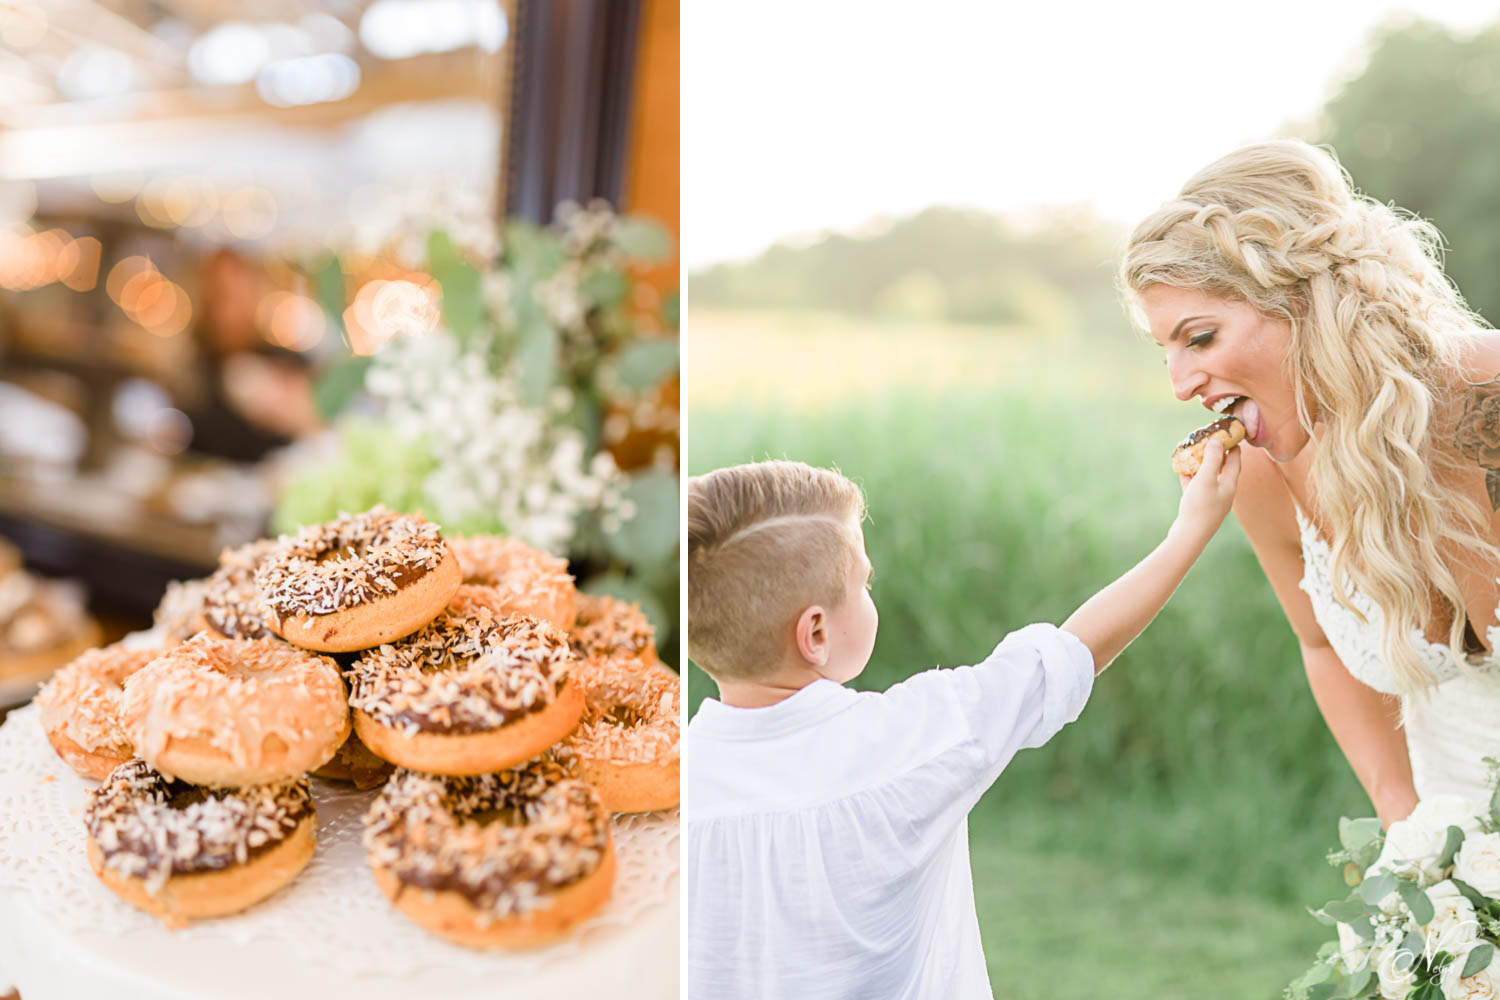 vegan donuts from Cashew Chattanooga as wedding cake. And boy feeding bride a donut